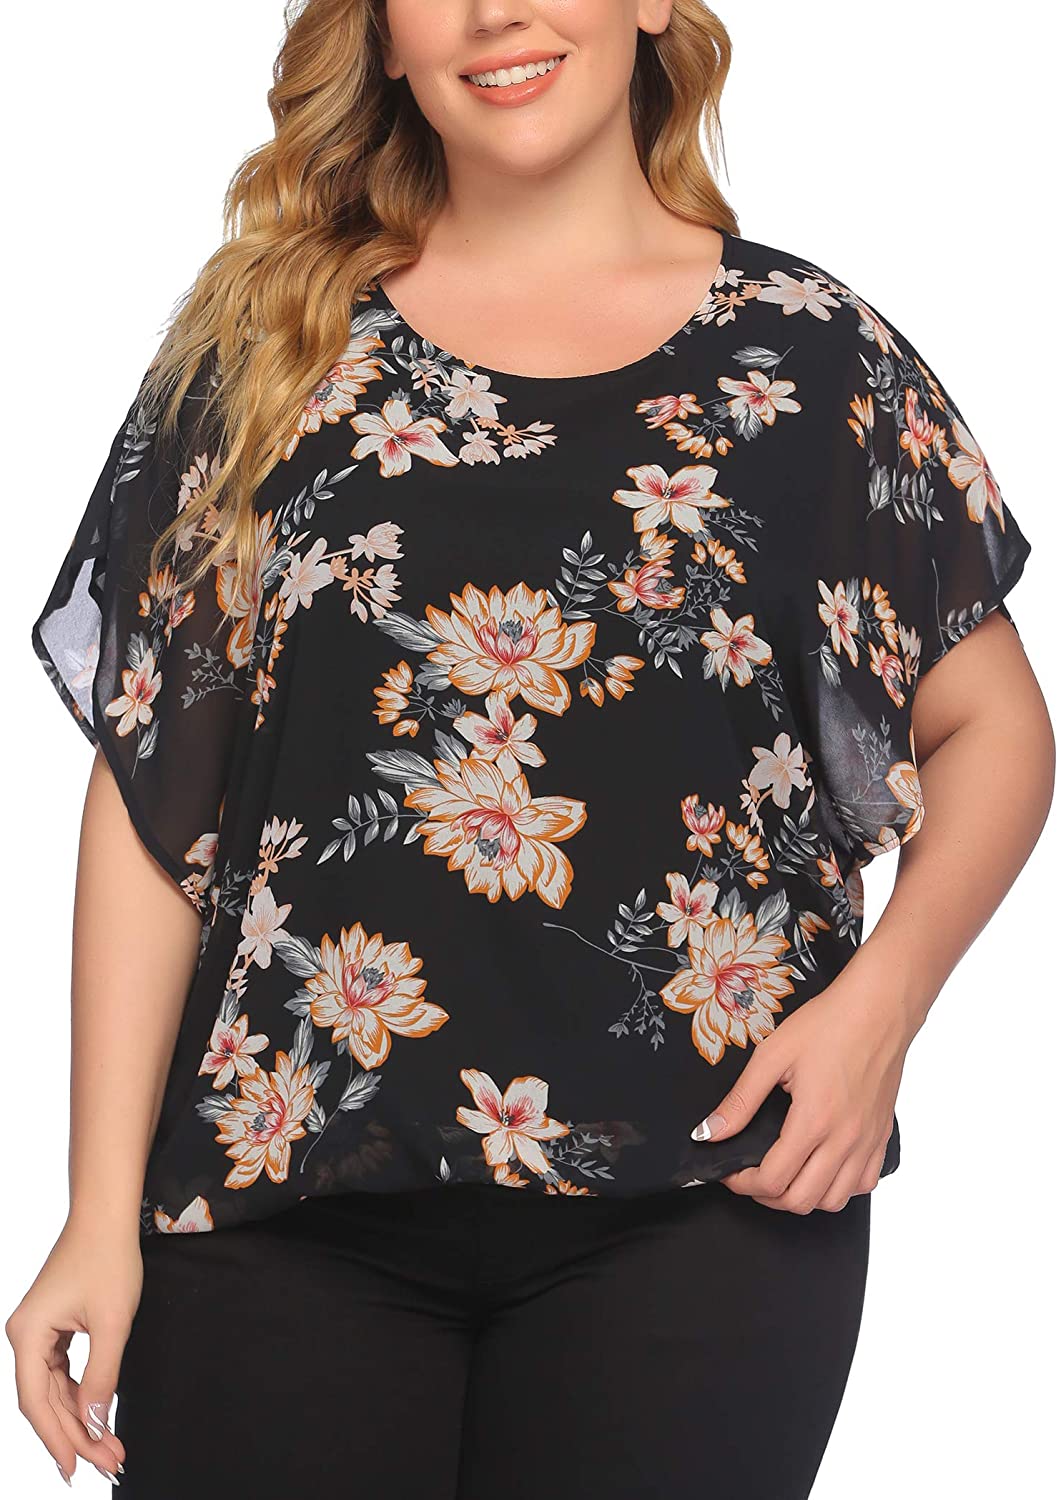 IN'VOLAND Plus Size Women Chiffon Blouse Batwing Sleeve Tops Scoop